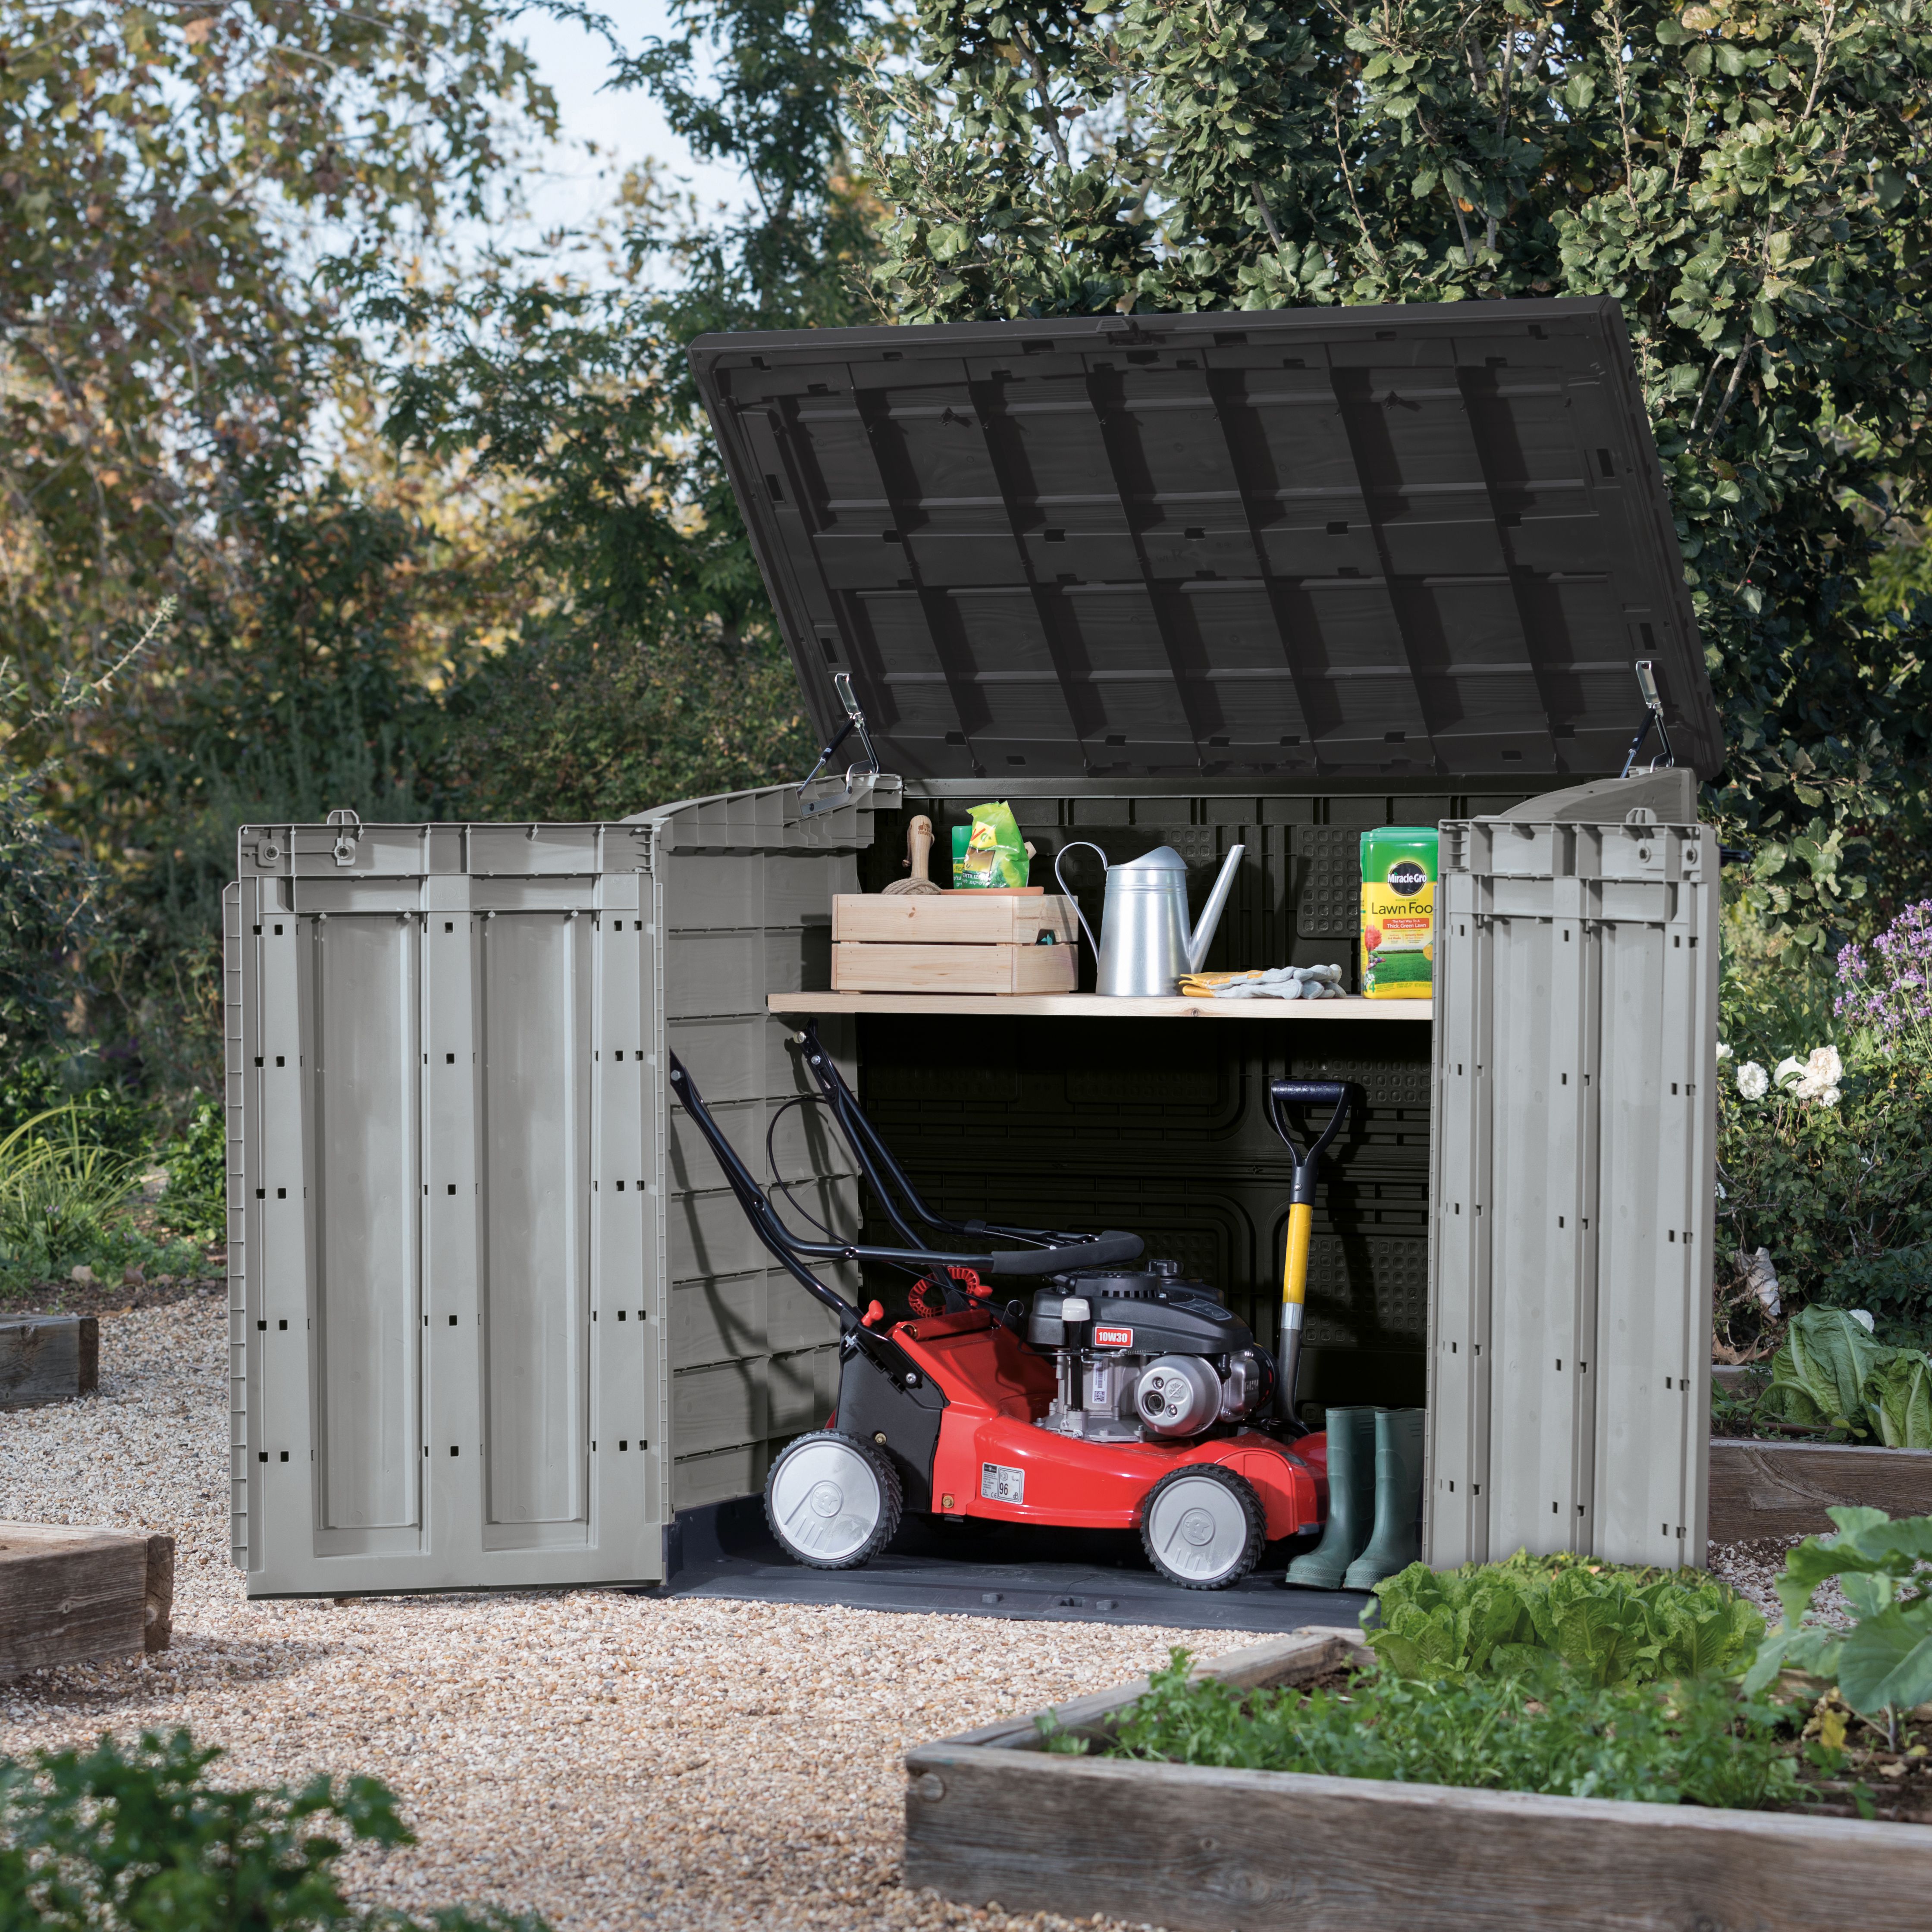 Keter Store It Out Max Grey 1200L Pent Garden storage